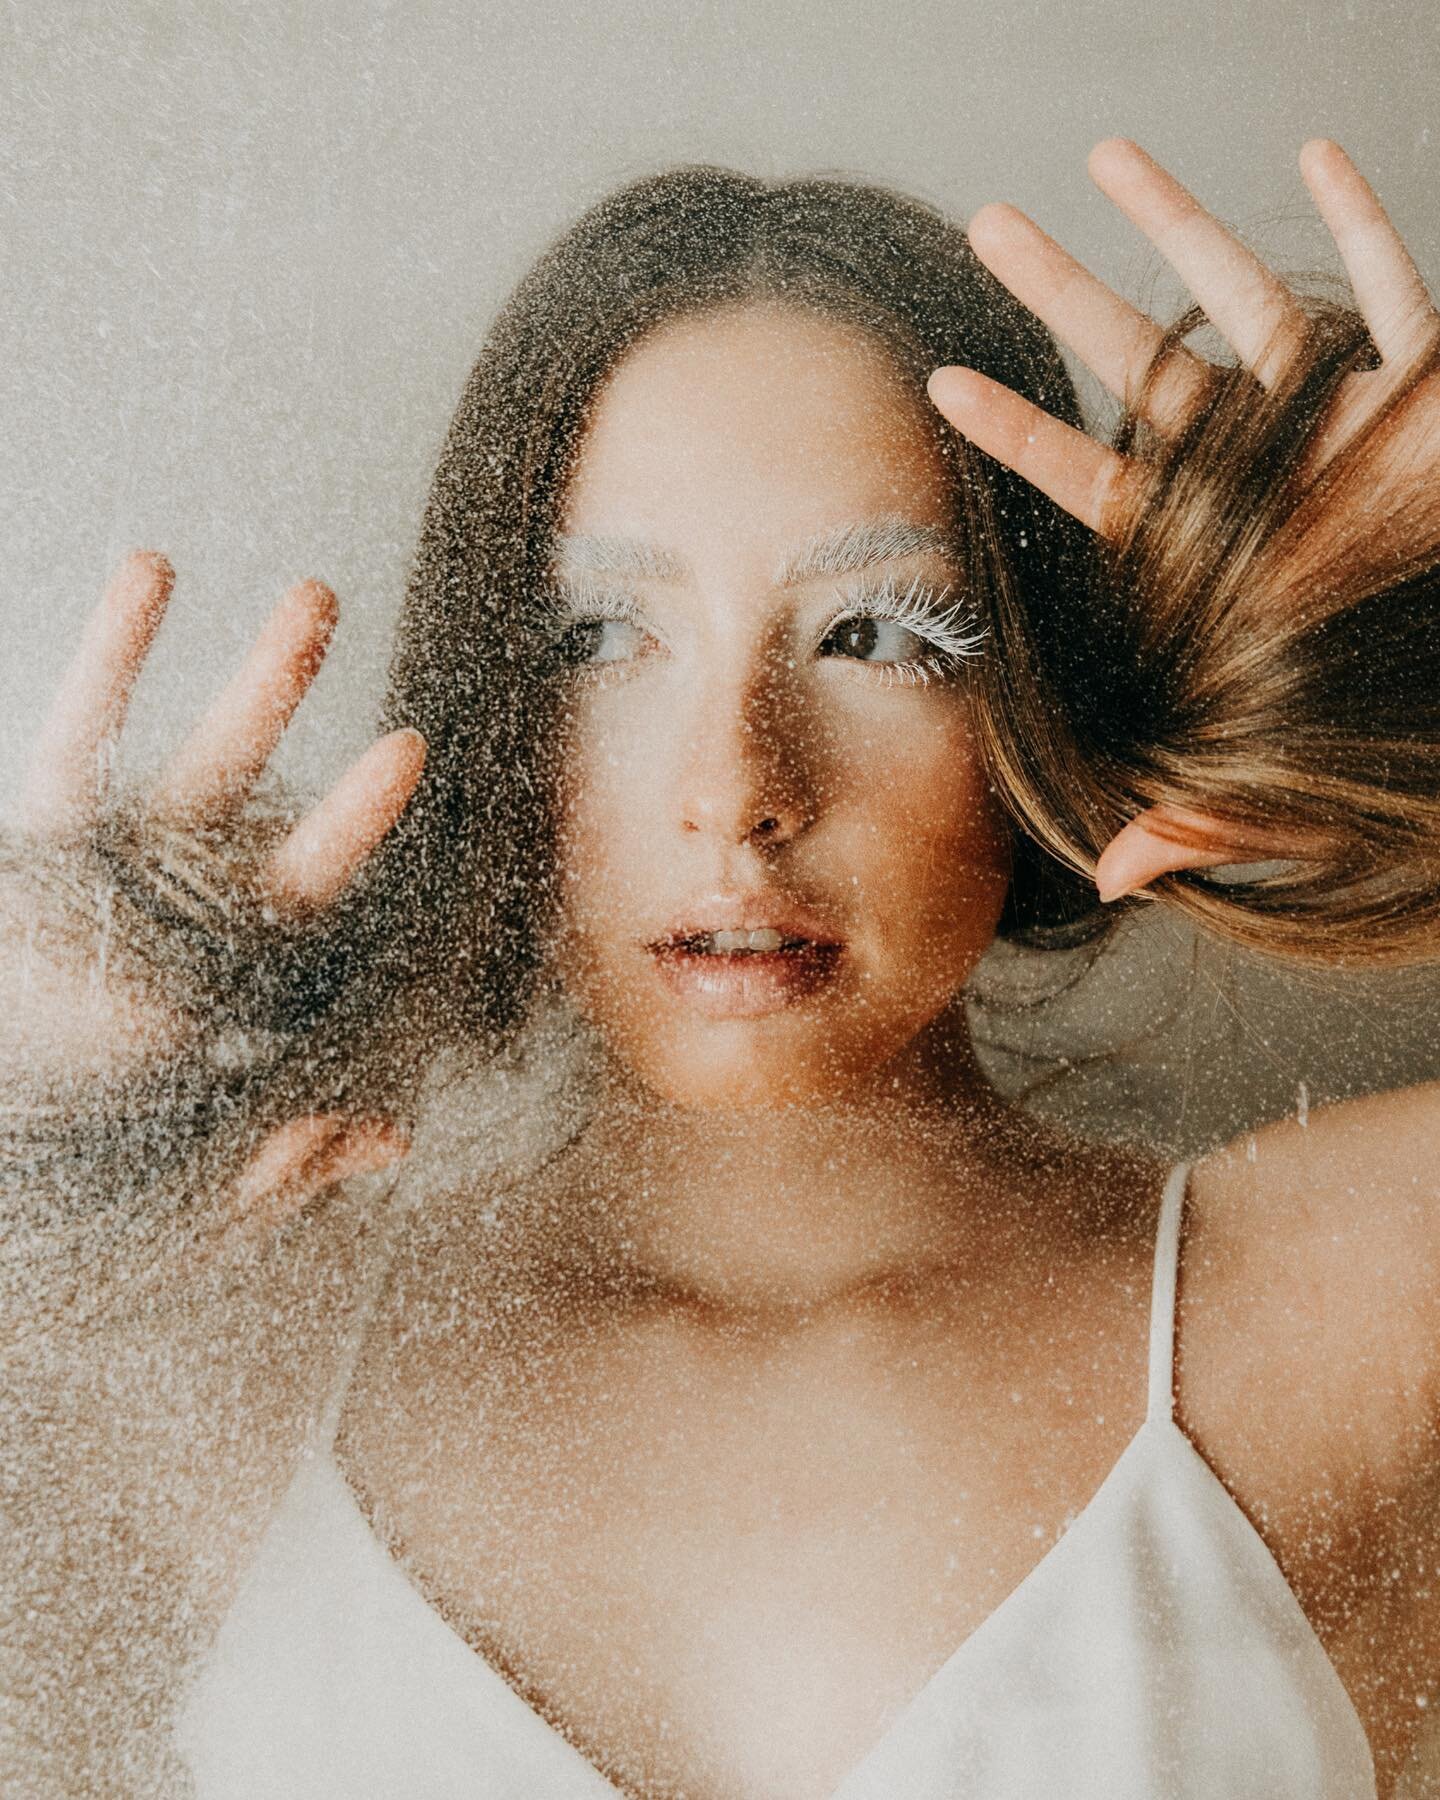 Happy Monday friendos! Felt like posting a little throw back session from this crazy creative shoot. We had an idea to do a frosty makeup and some speckled/frosted screens for texture in front of Nicole. We also dabbled a bit with double exposures an